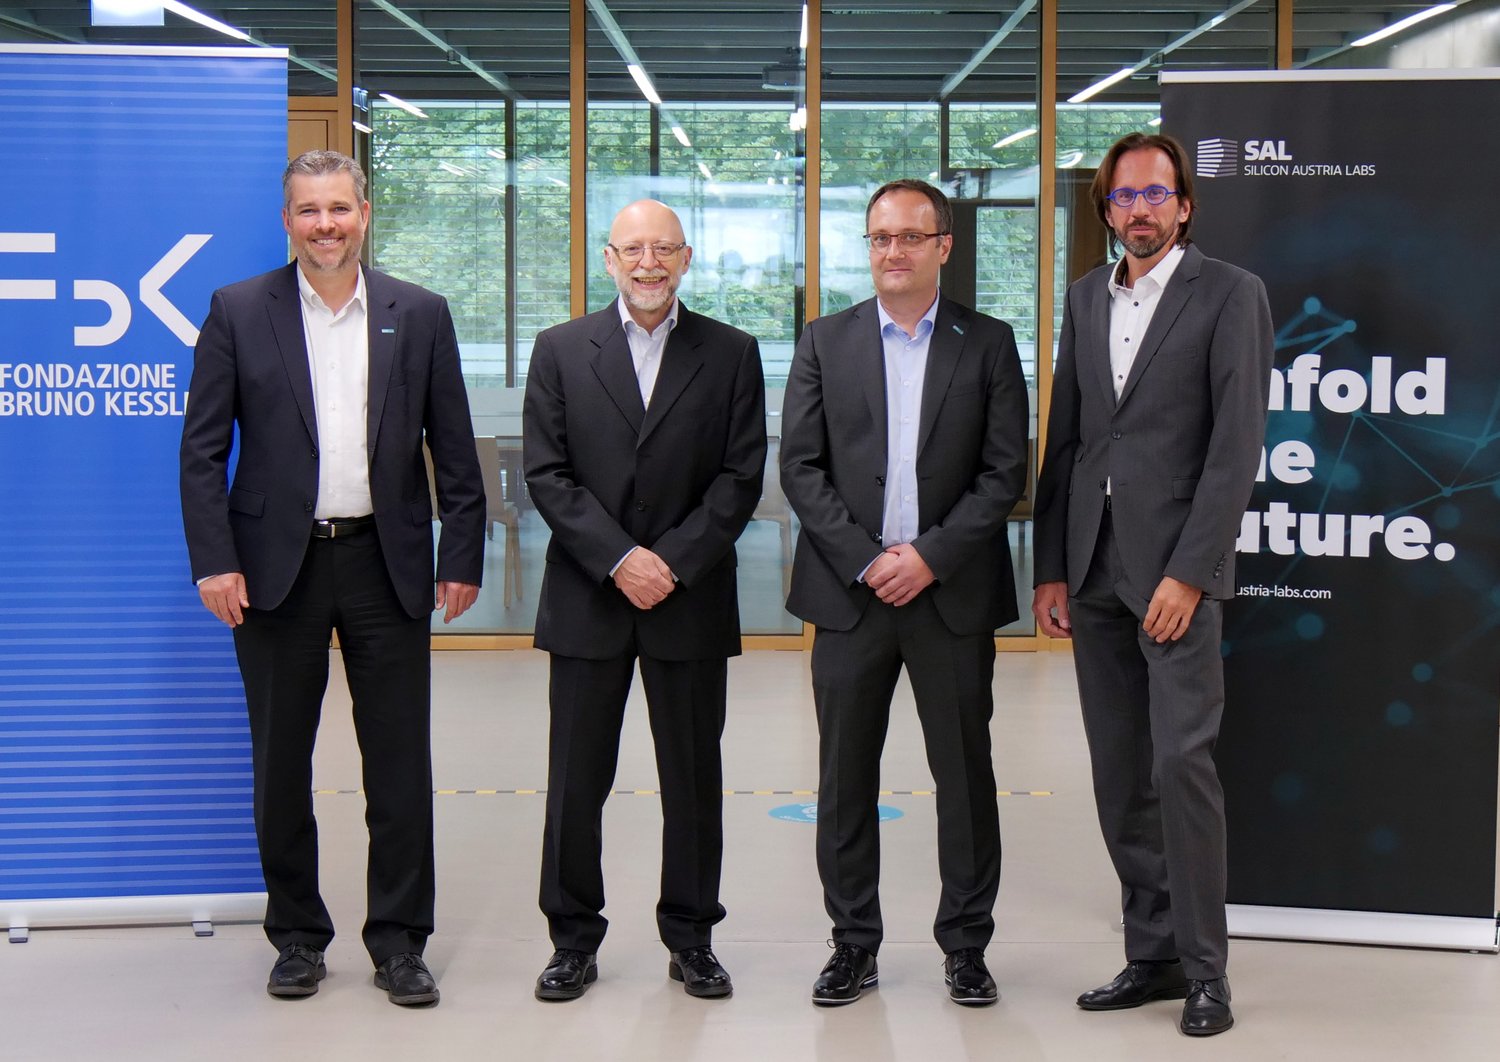 Gerald Murauer, Alessandro Cimatti, Ingo Pill and Andras Montvay stand next to each other and smile into the camera